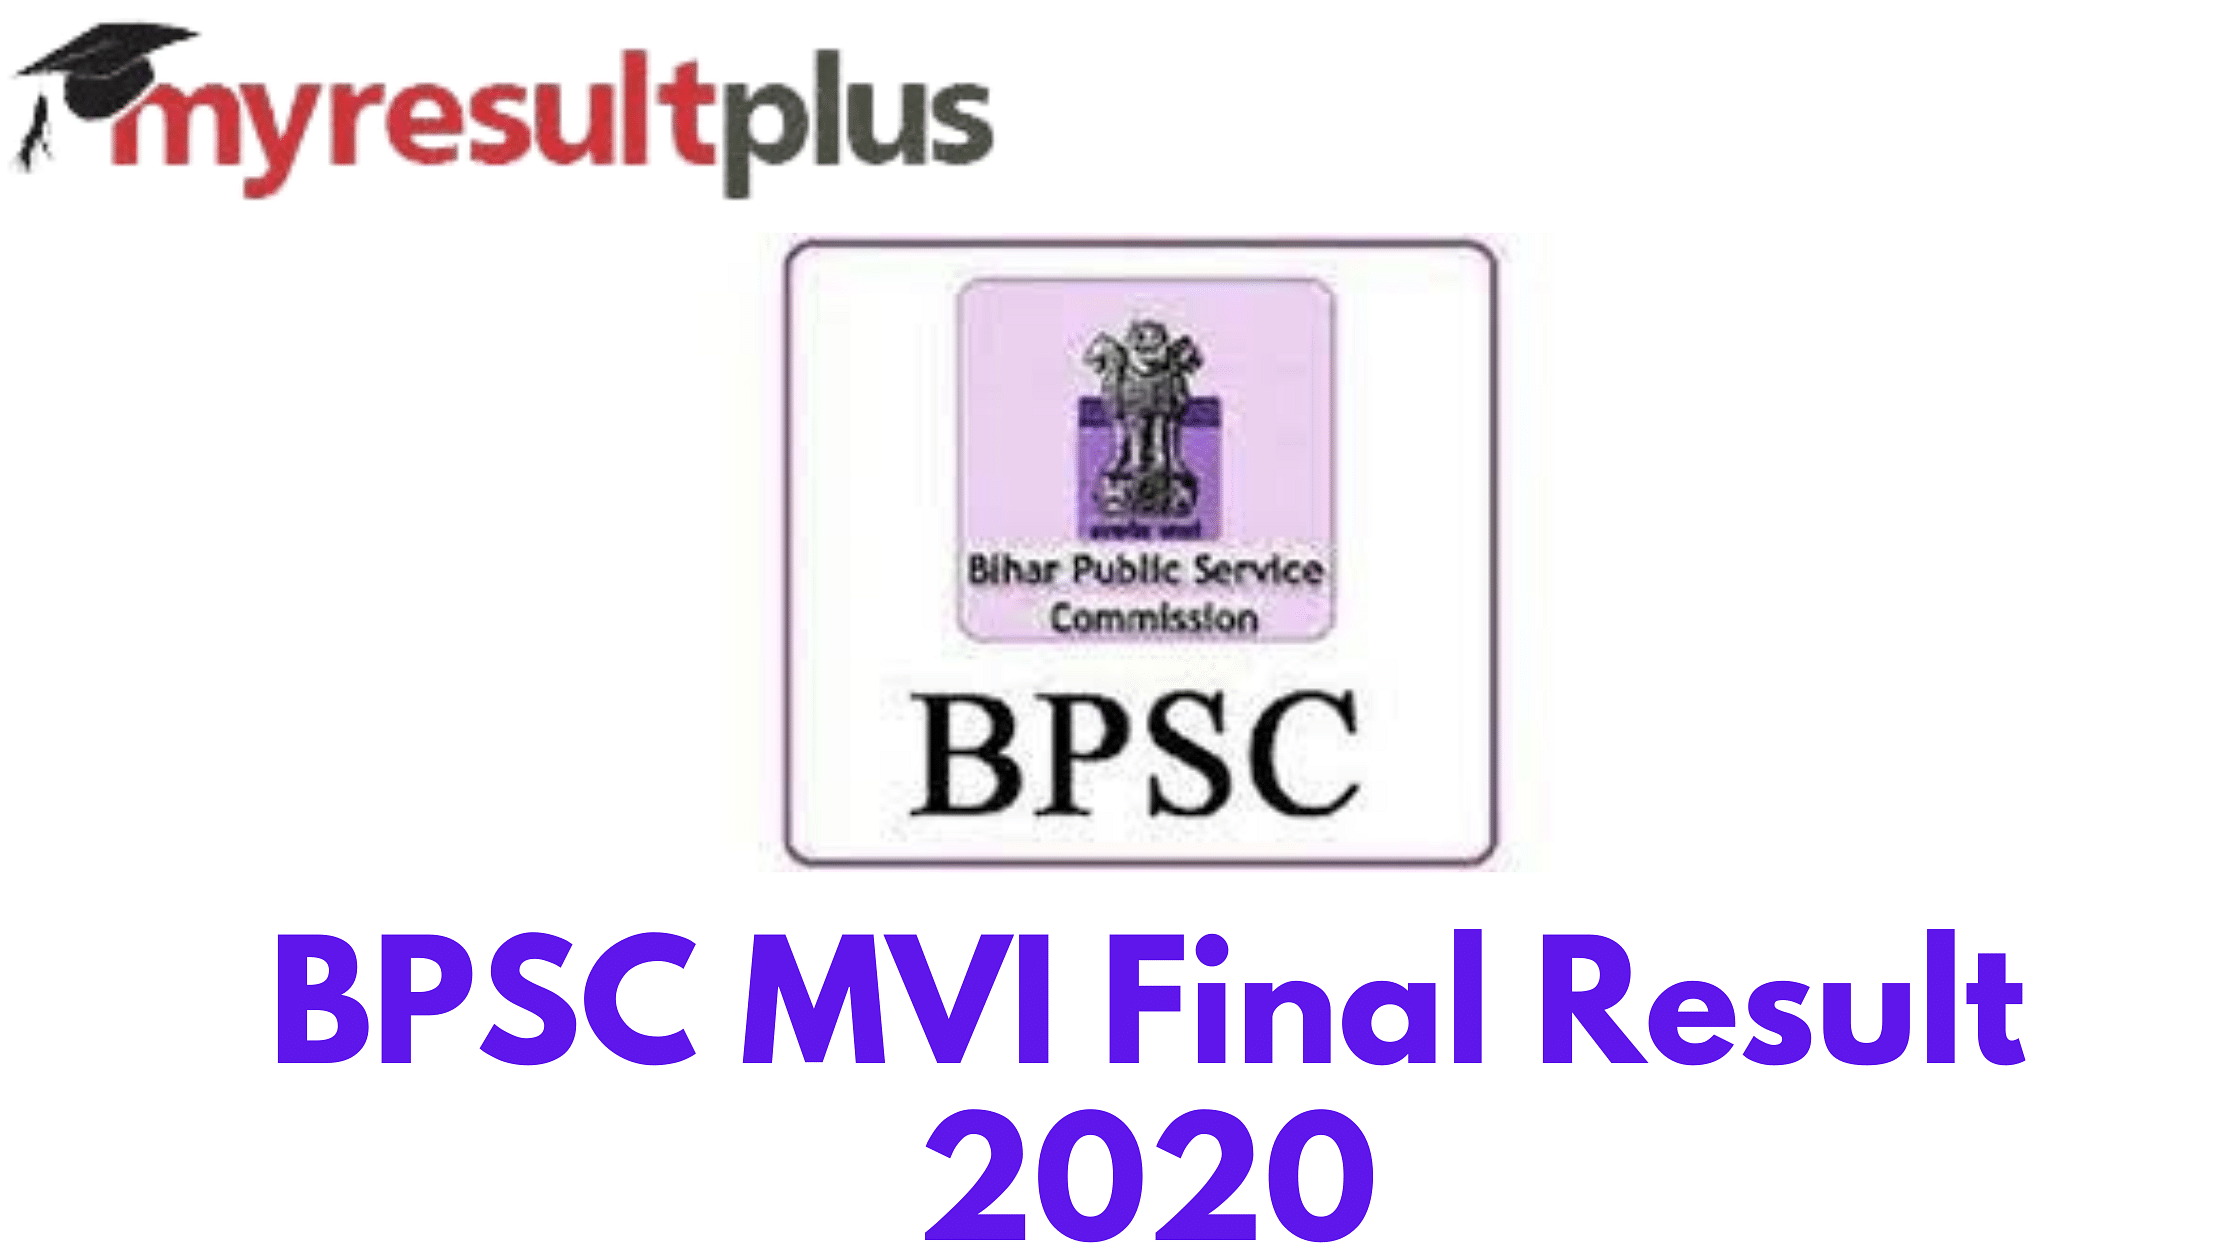 BPSC MVI Final Result 2020 Announced, Know How to Check Here